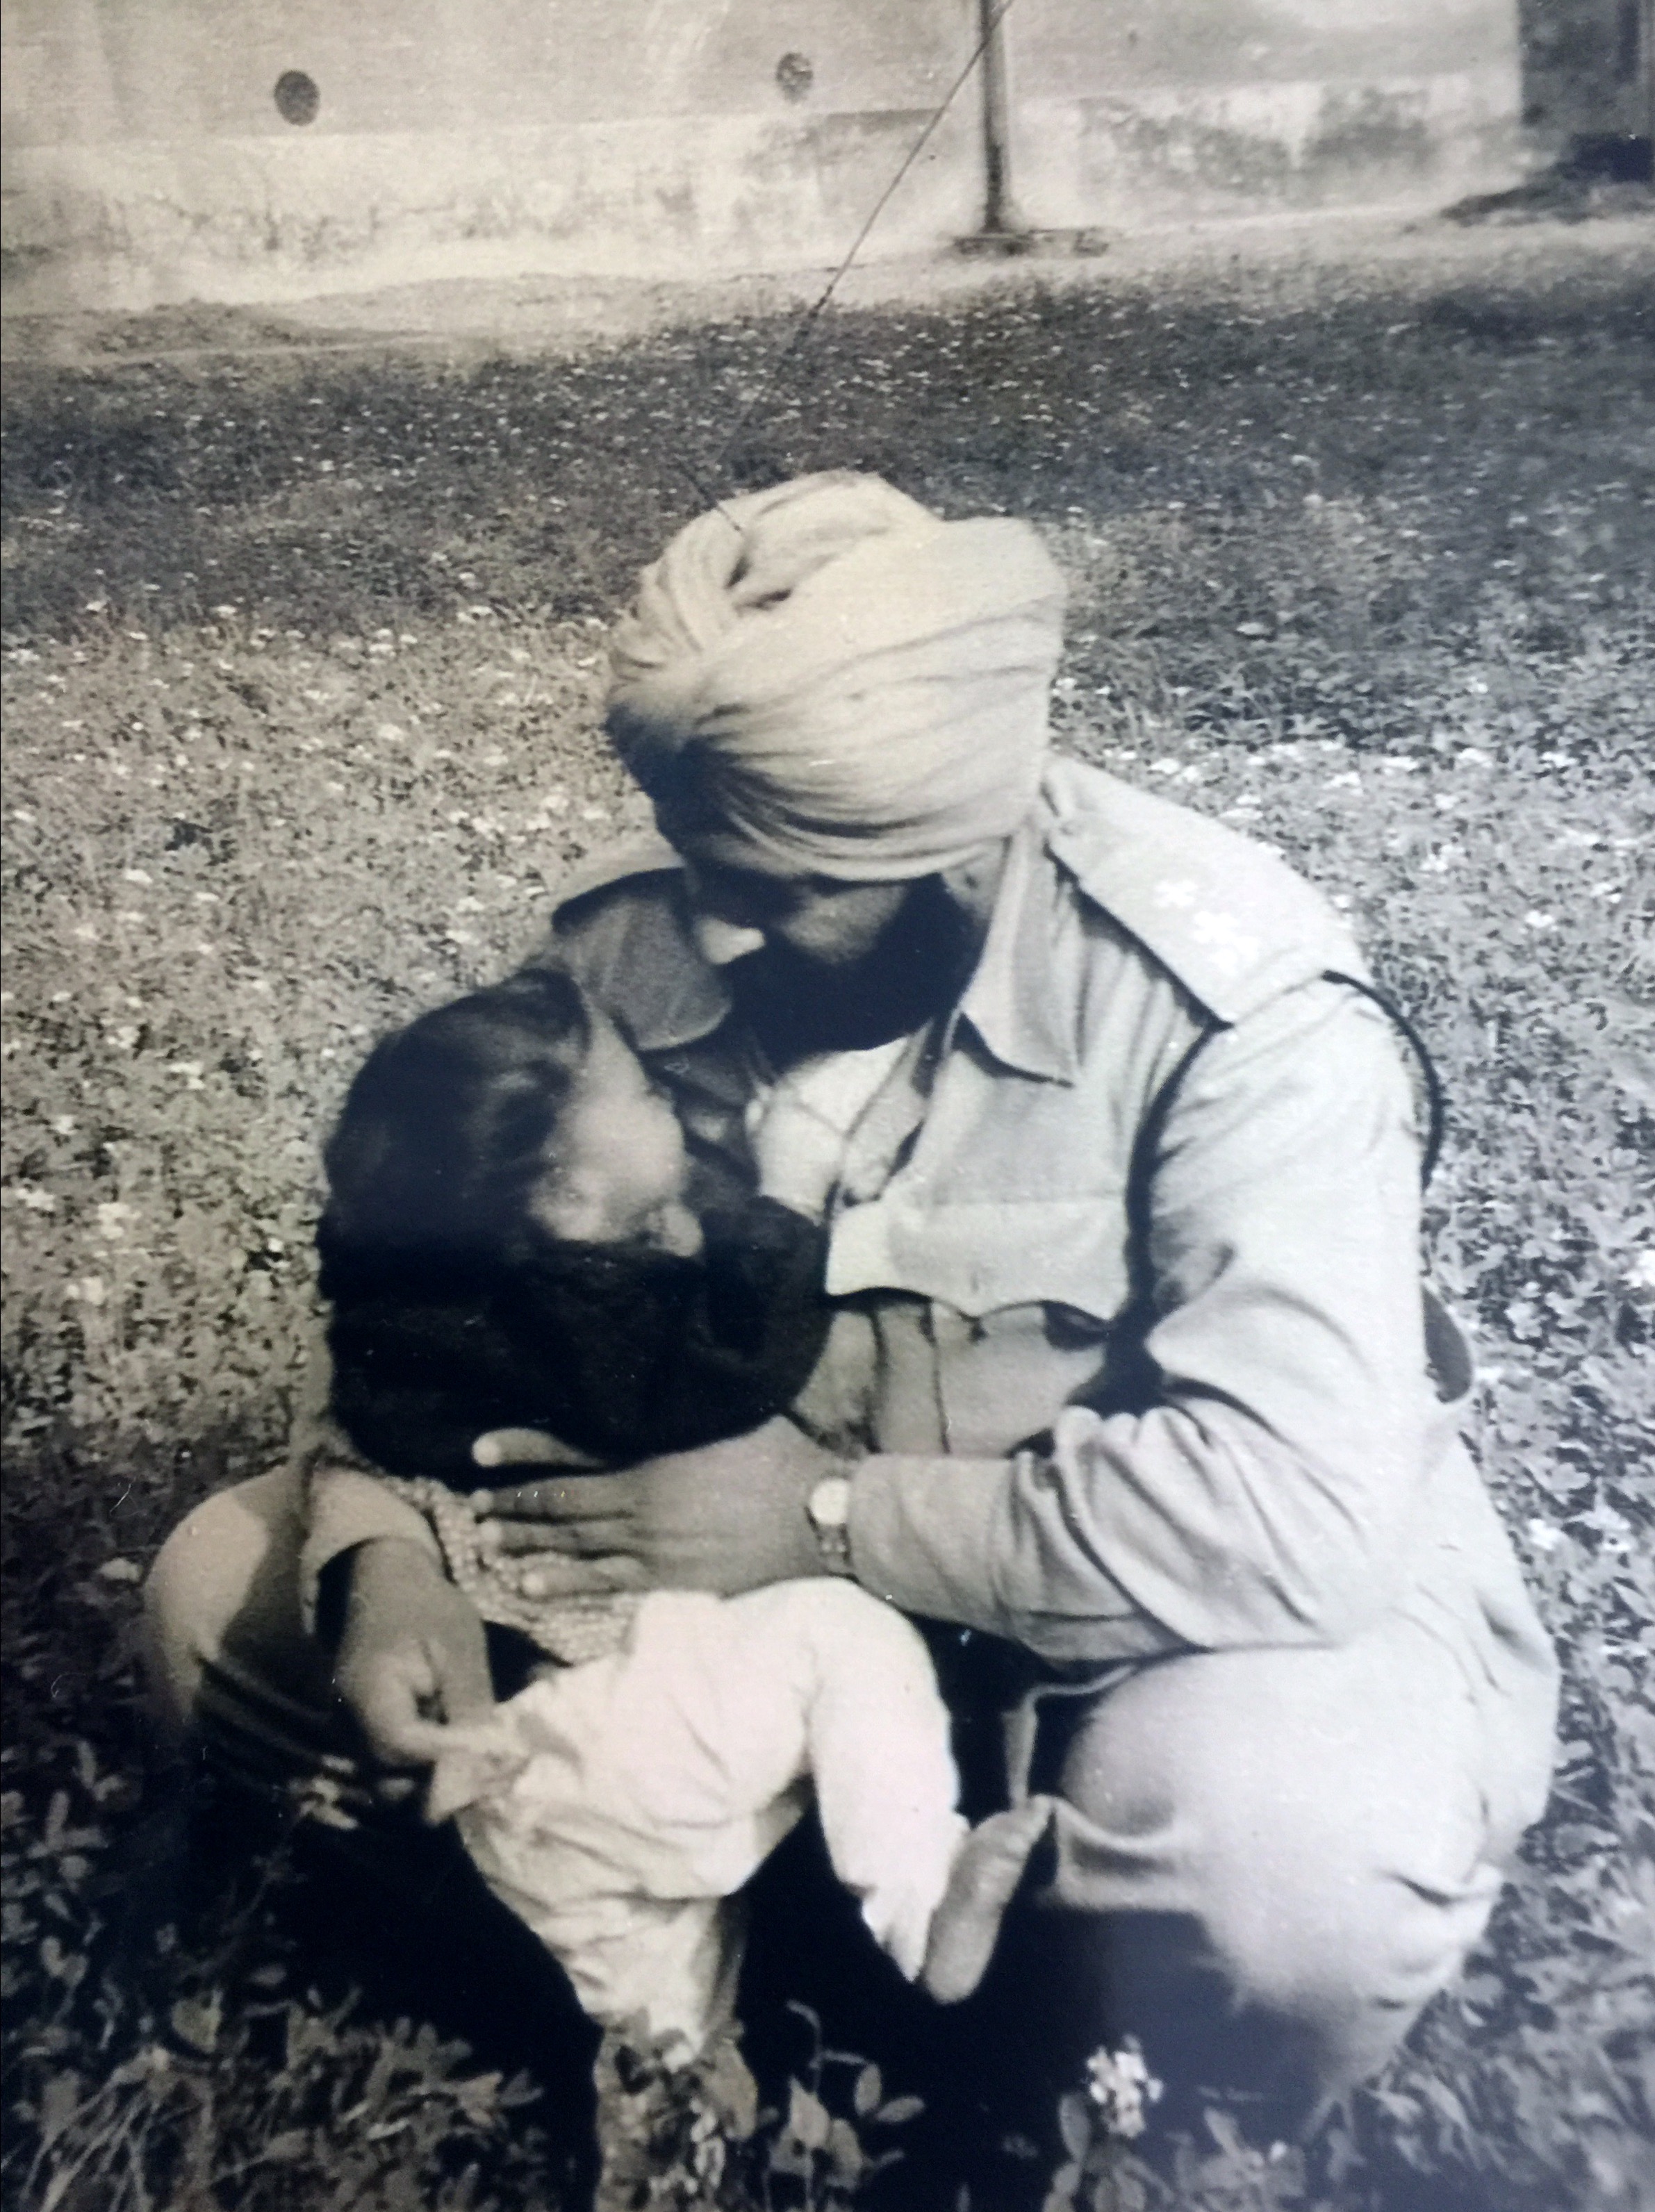 Little JagMohan trying to climbing into dad's lap. 1950?